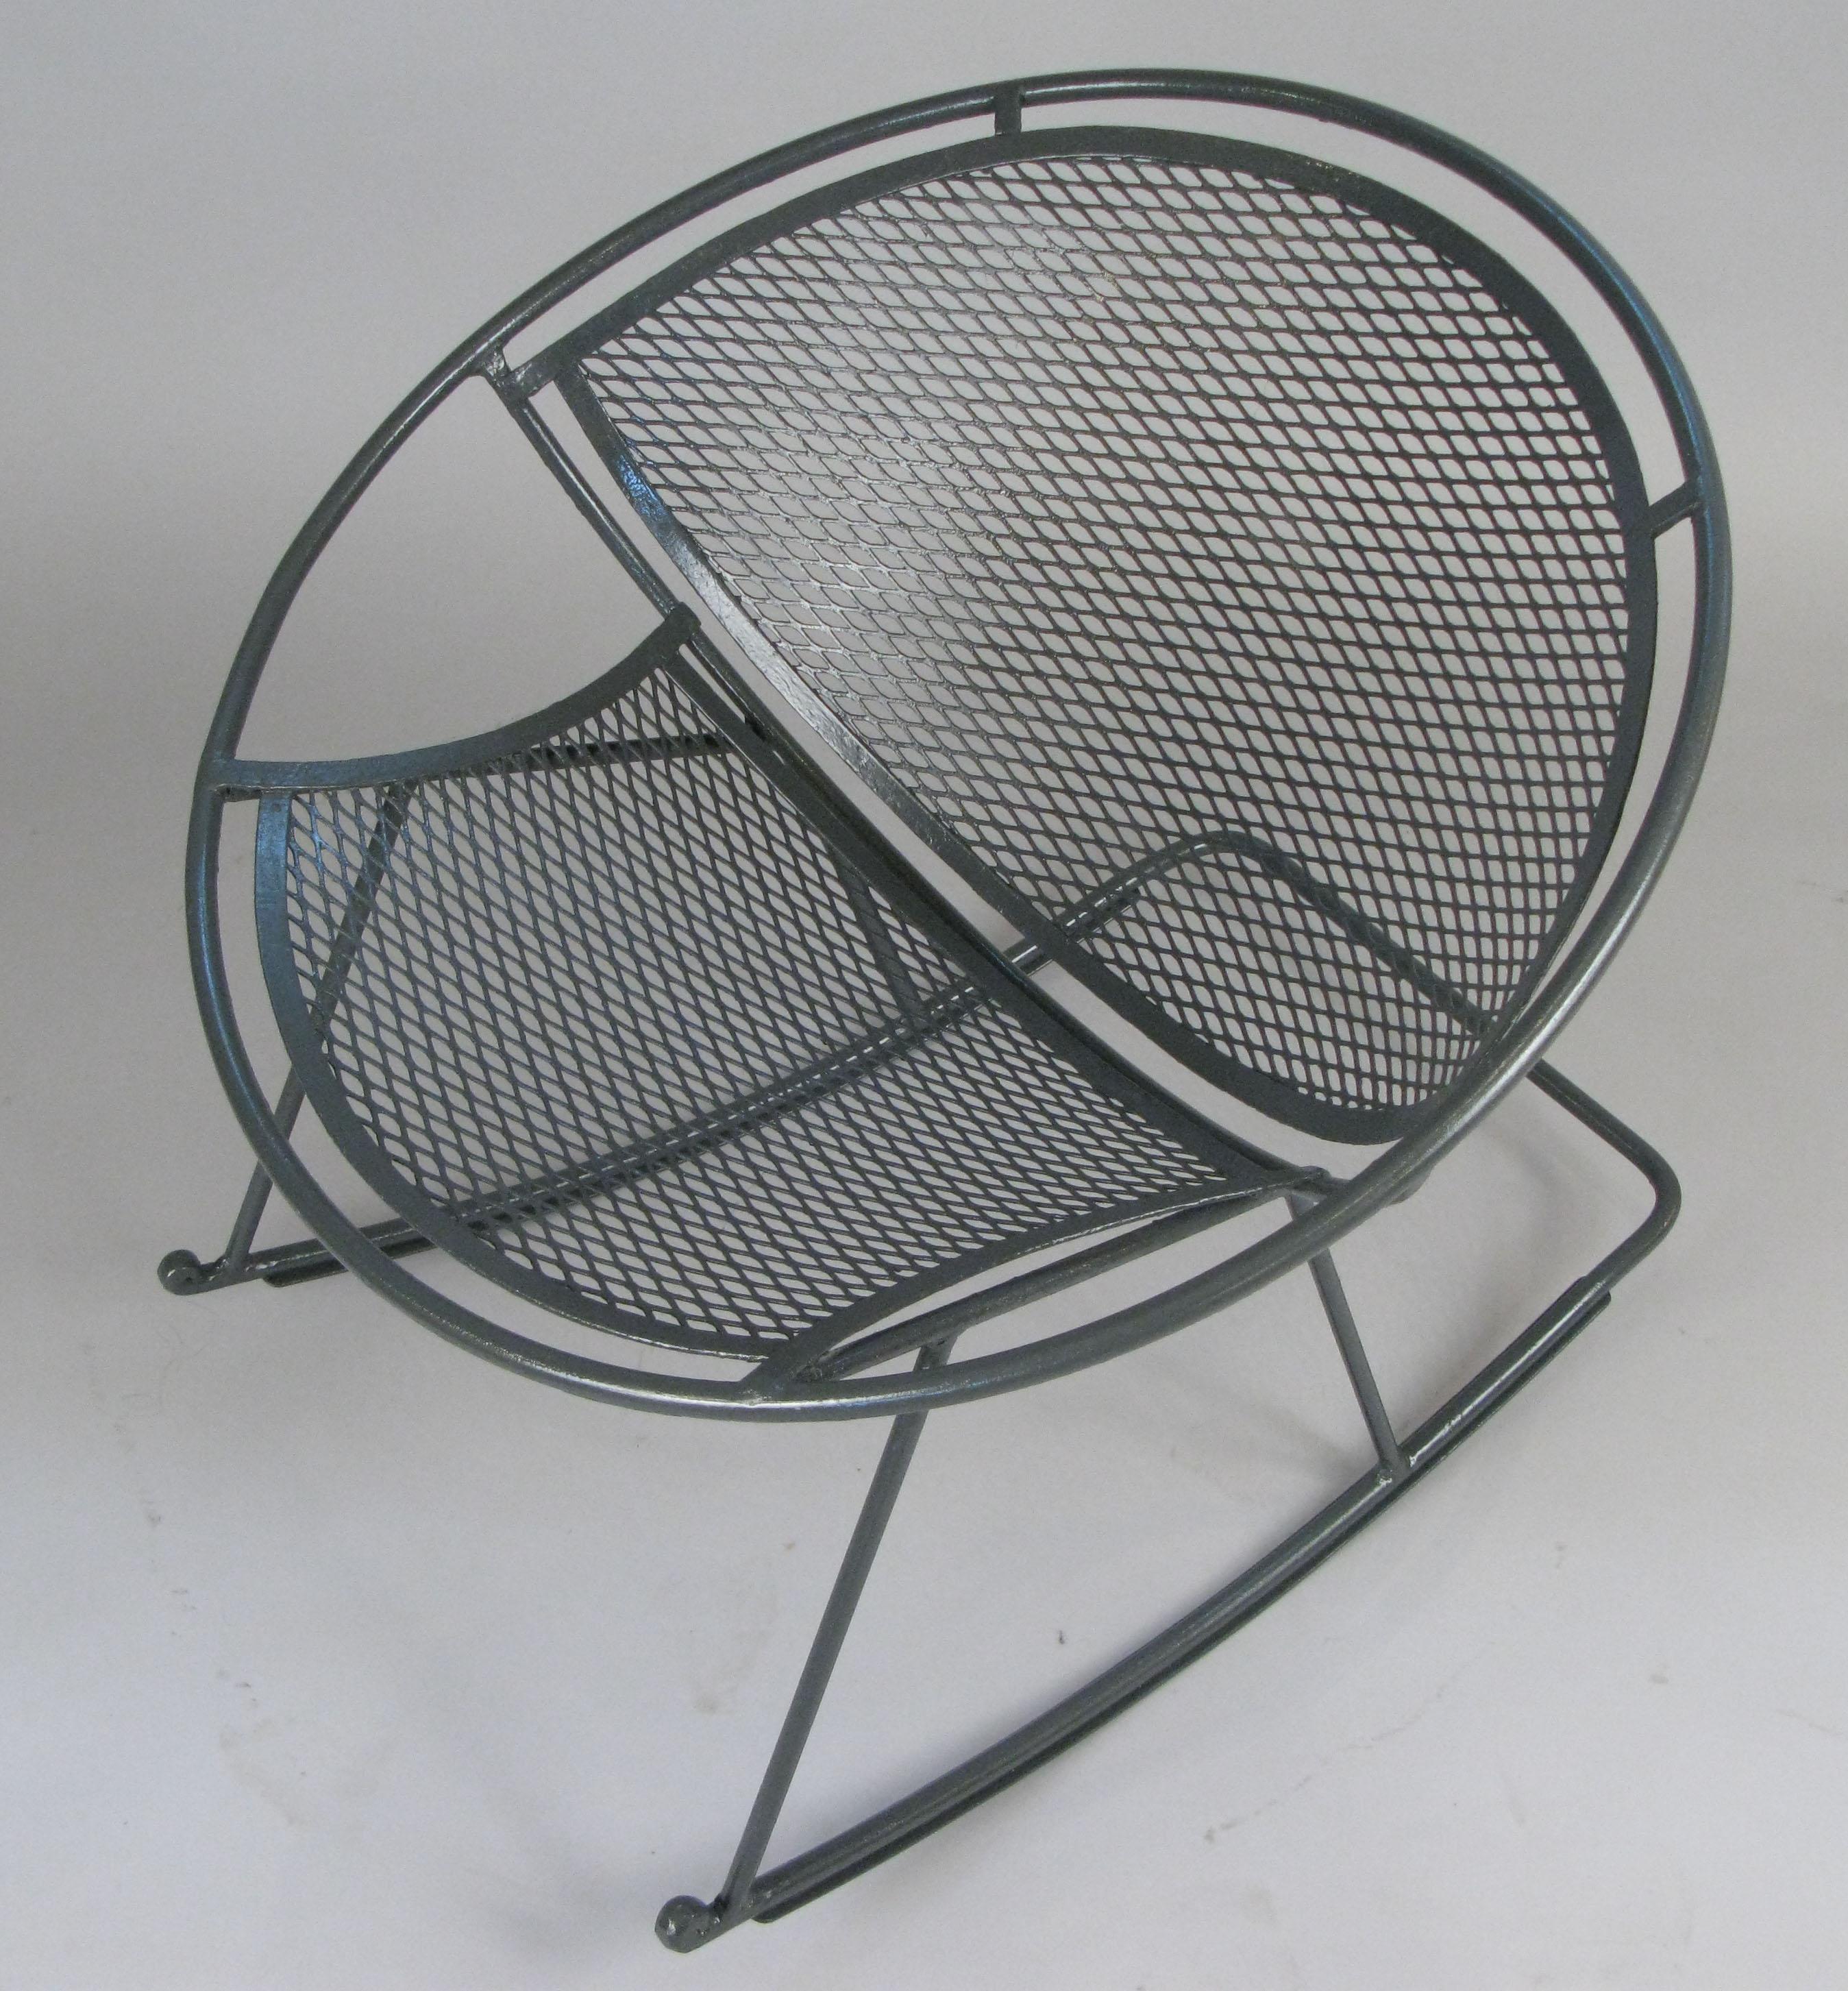 part of a complete set of vintage 1950's Salterini 'Radar', this rocking chair is one of the hardest pieces to find. very well made and in excellent condition, it is freshly refinished in dark grey, but can be finished in a color of your choice.